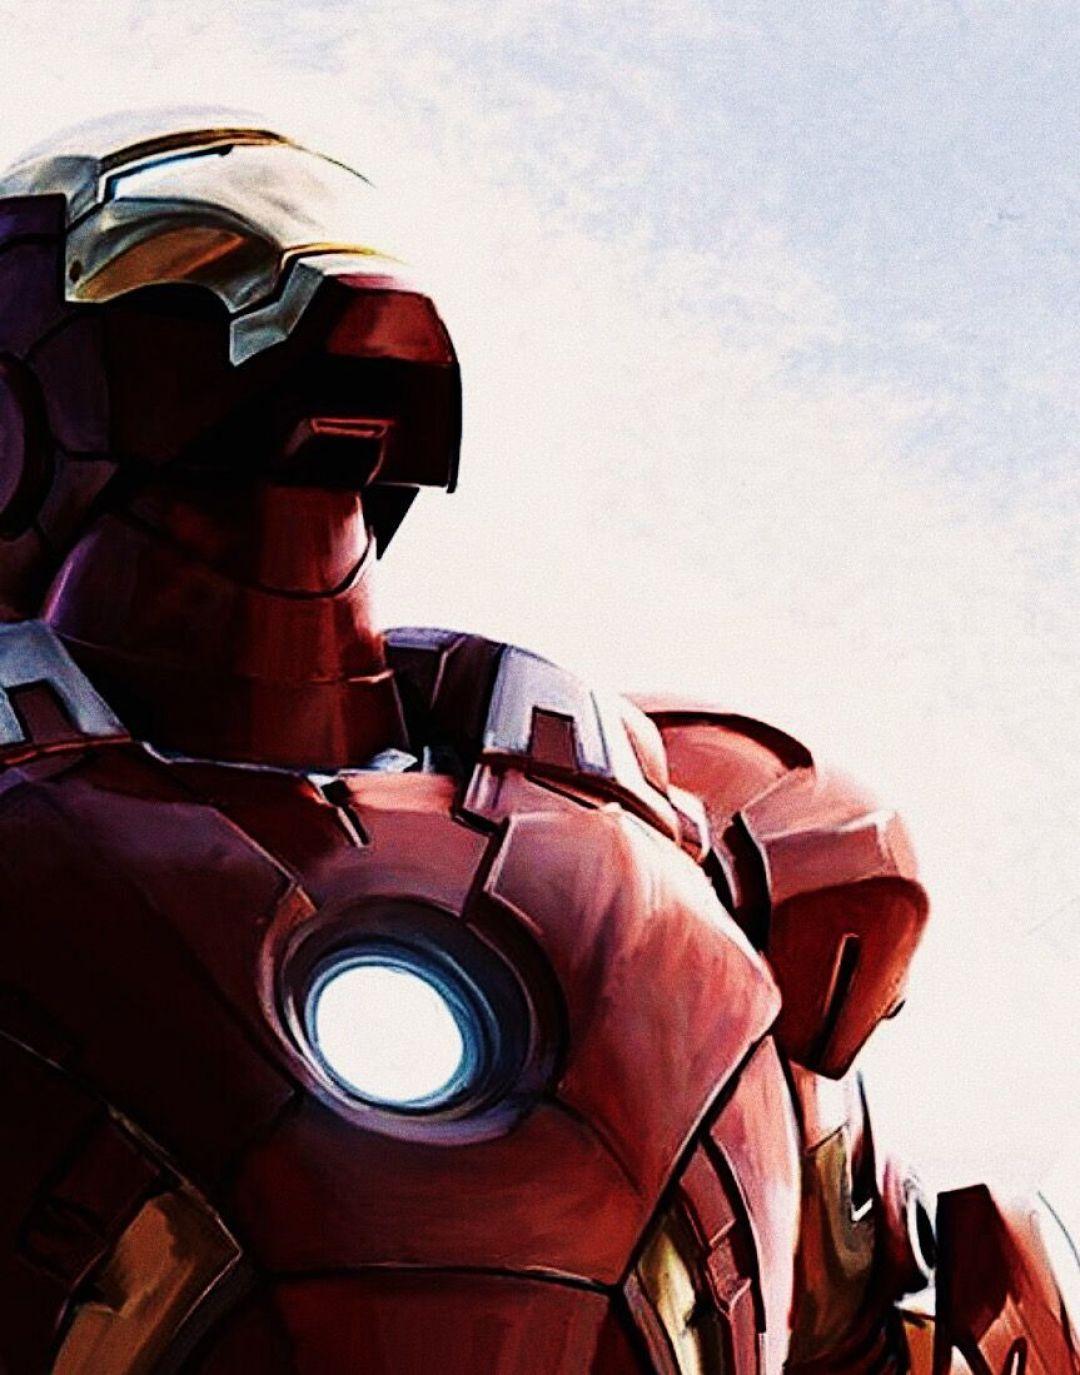 Iron Man in an extreme Level My new wallpaper   rironman